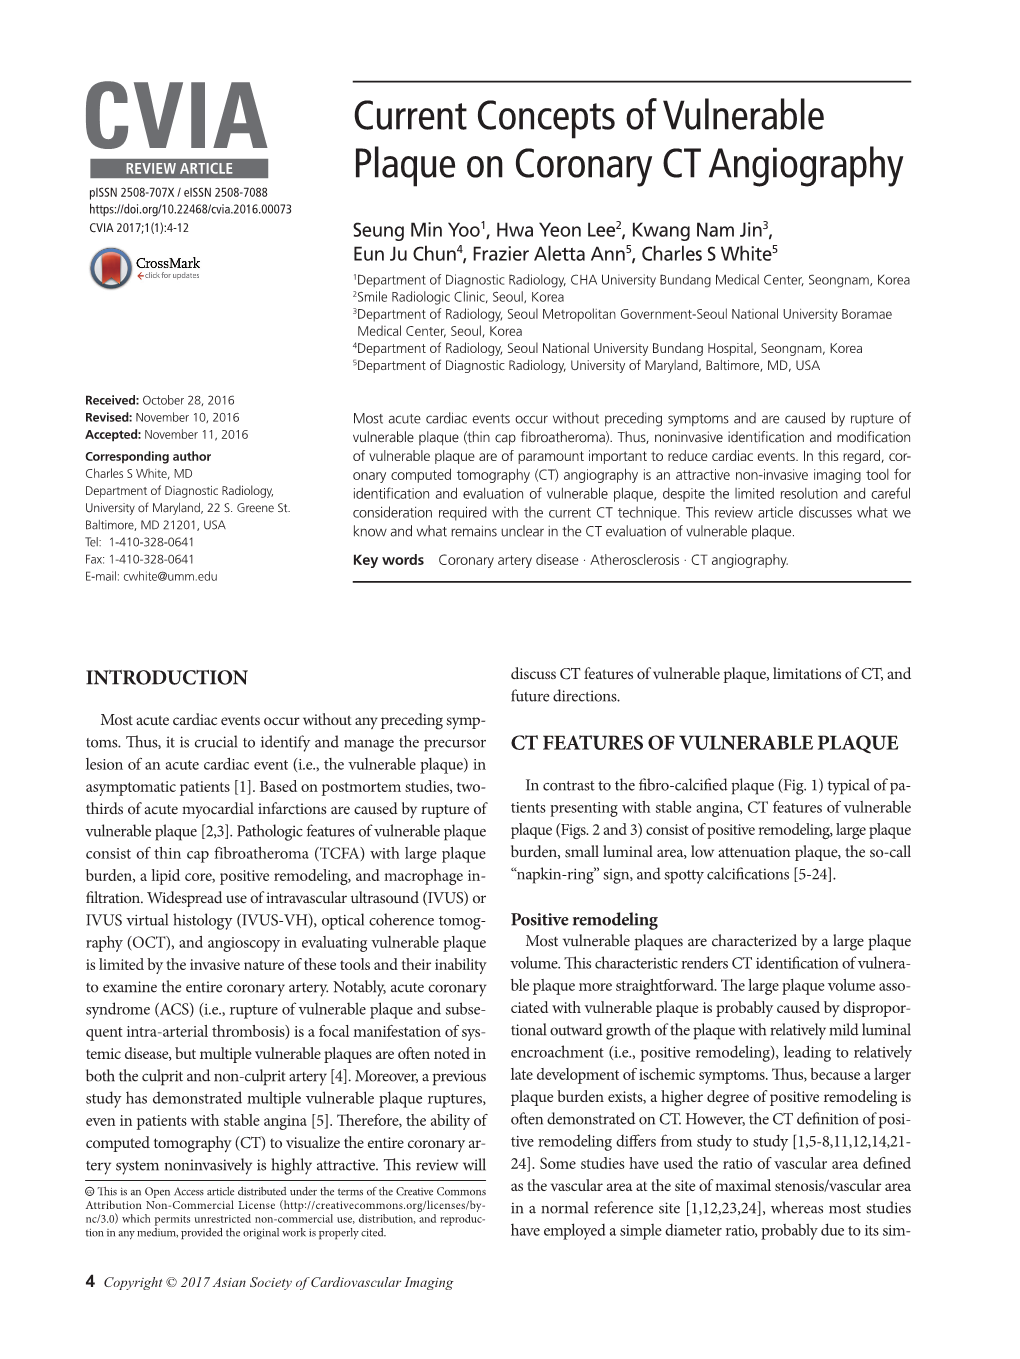 Current Concepts of Vulnerable Plaque on Coronary CT Angiography